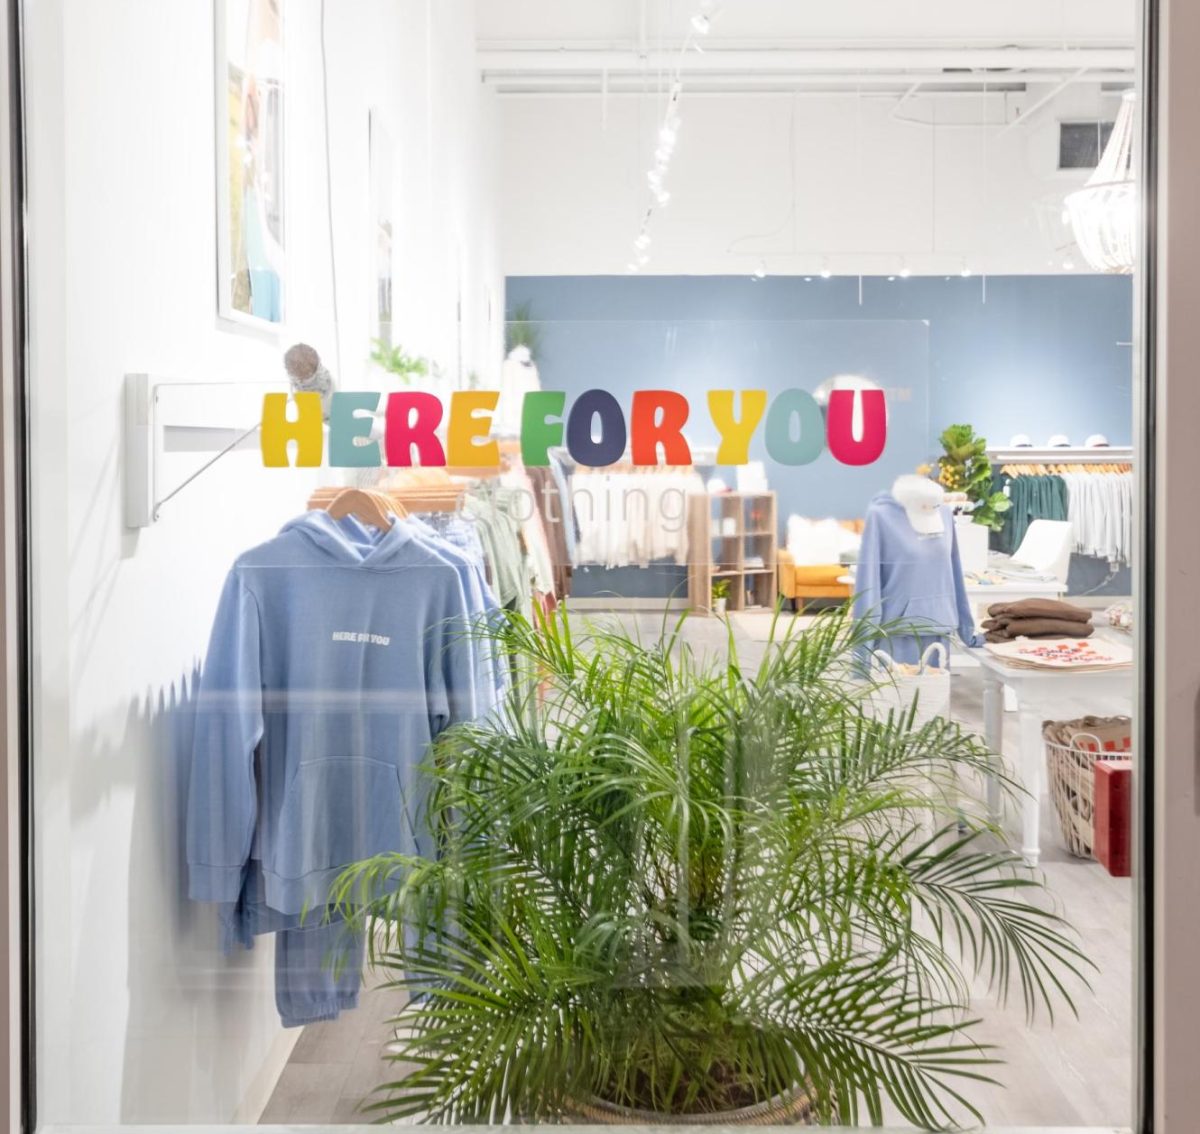 Here For You Clothing